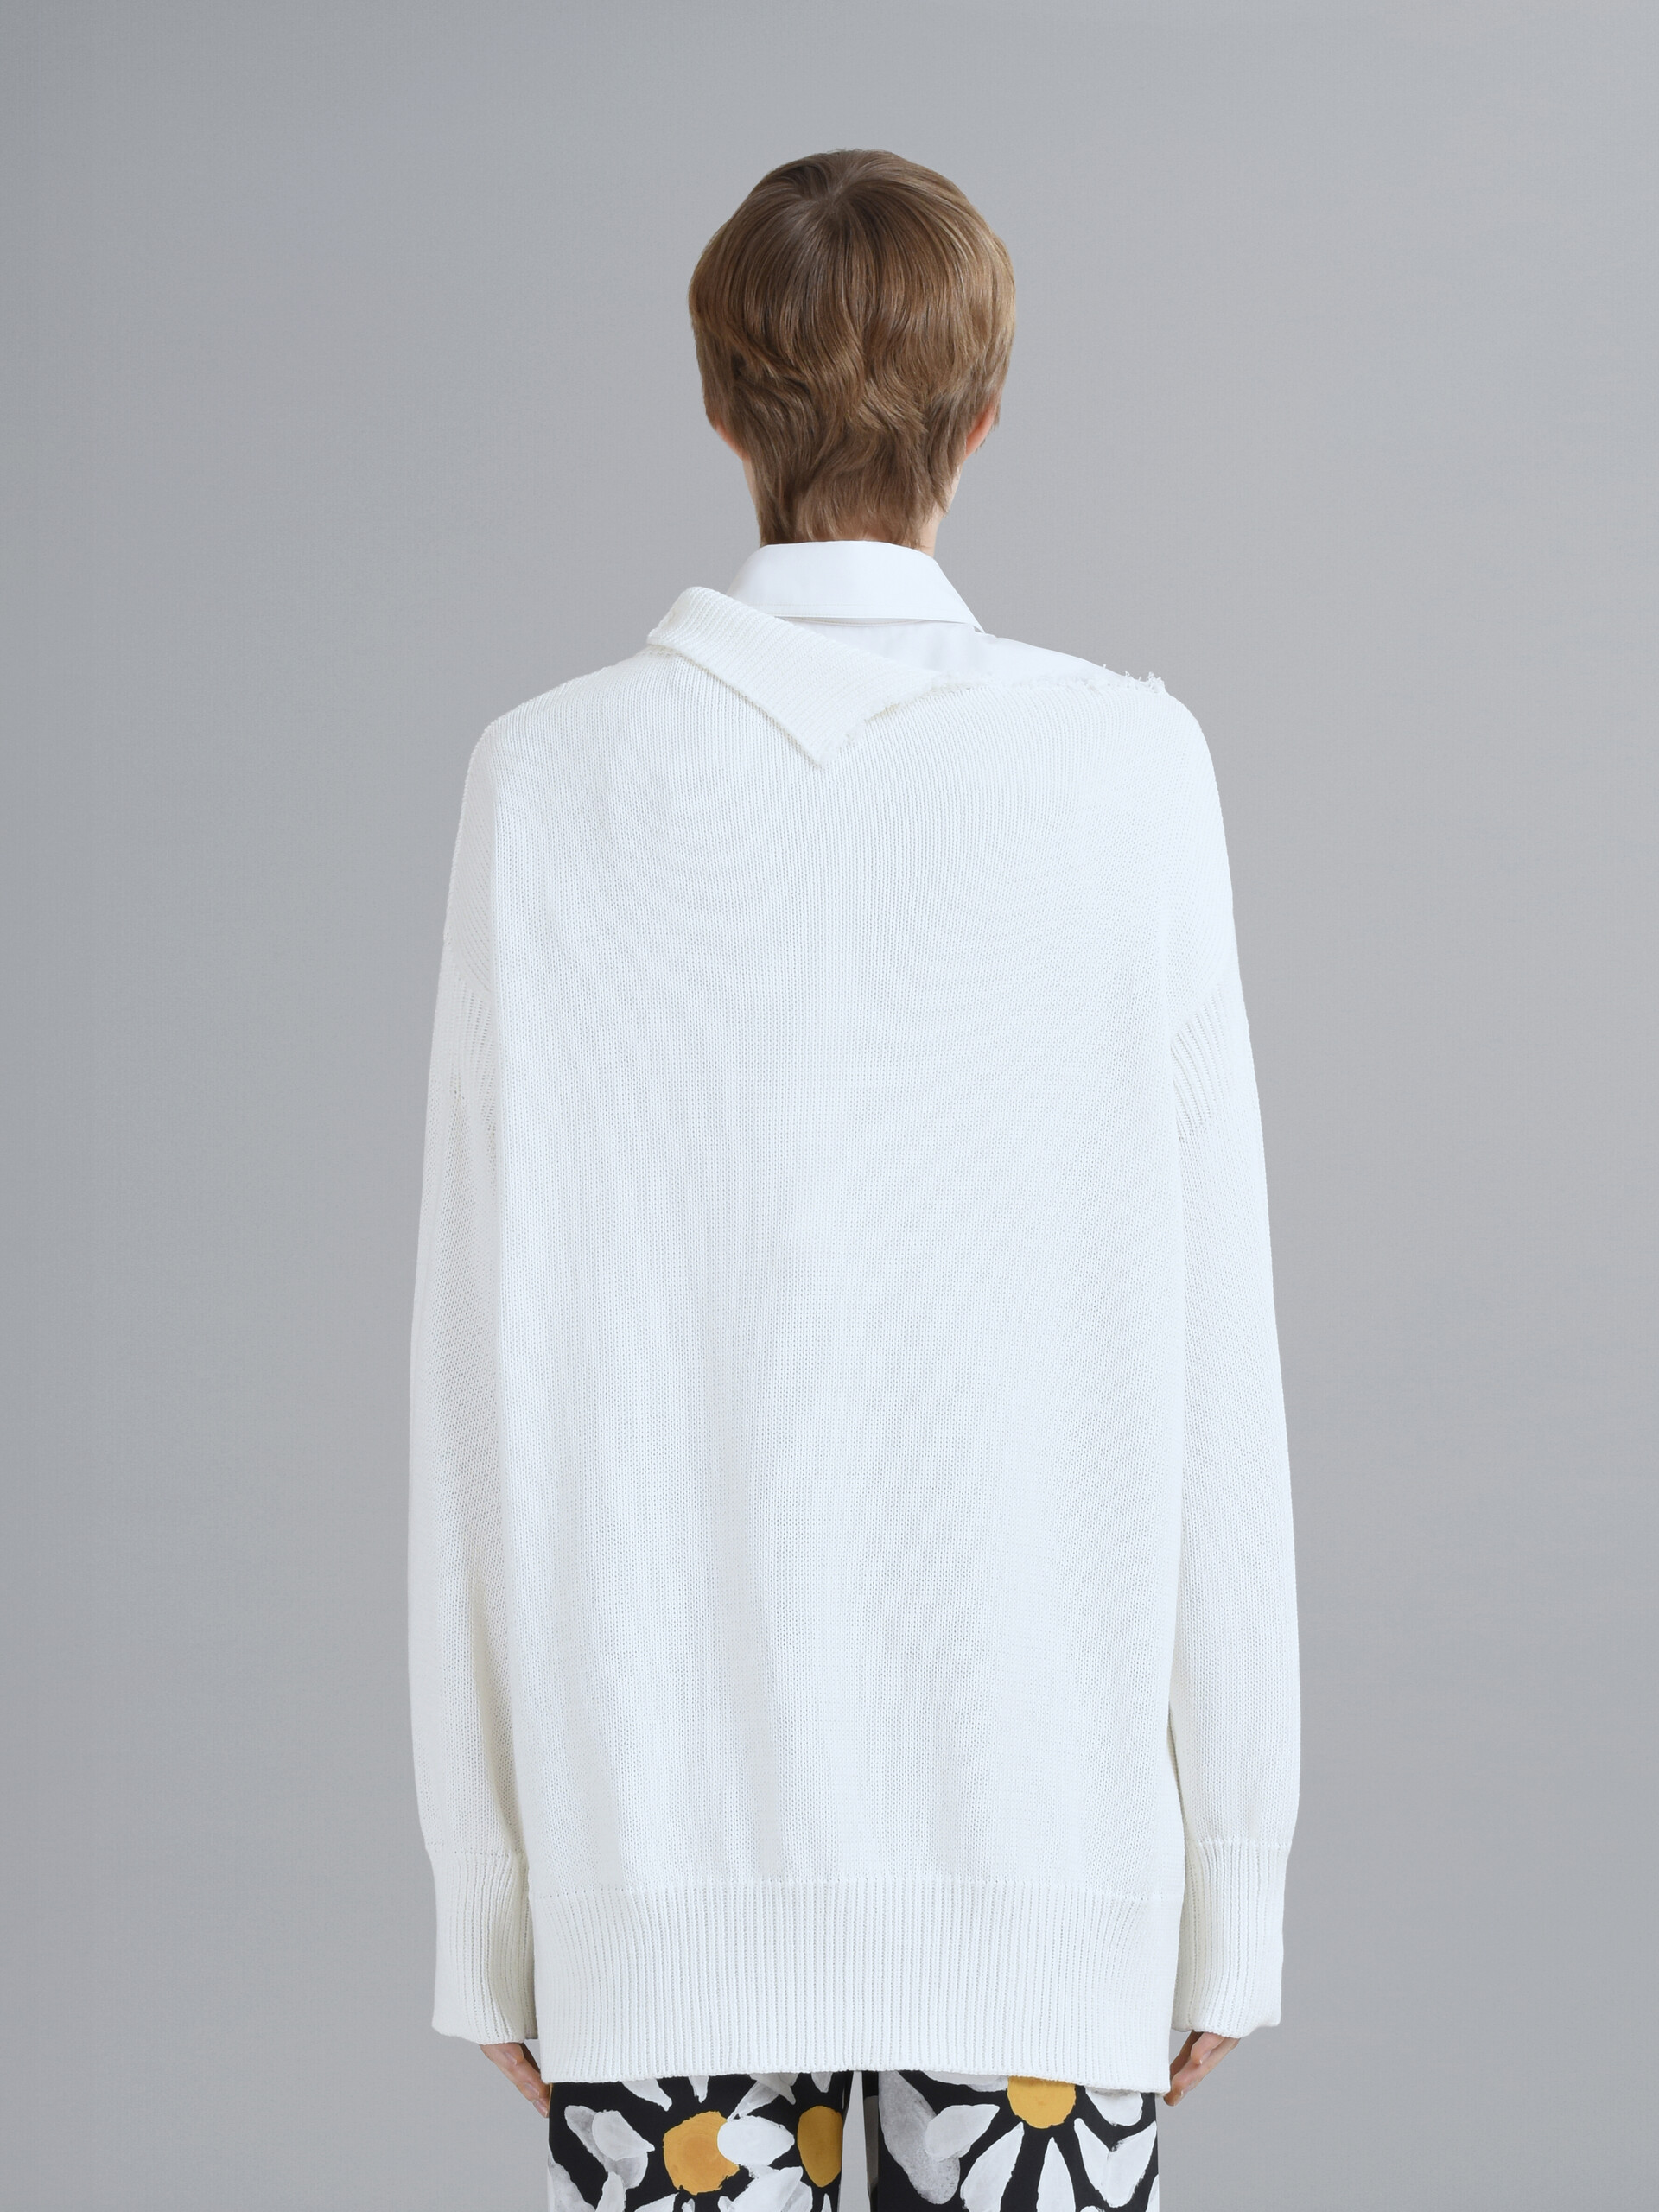 Crêpe cotton T-neck sweater - Pullovers - Image 3